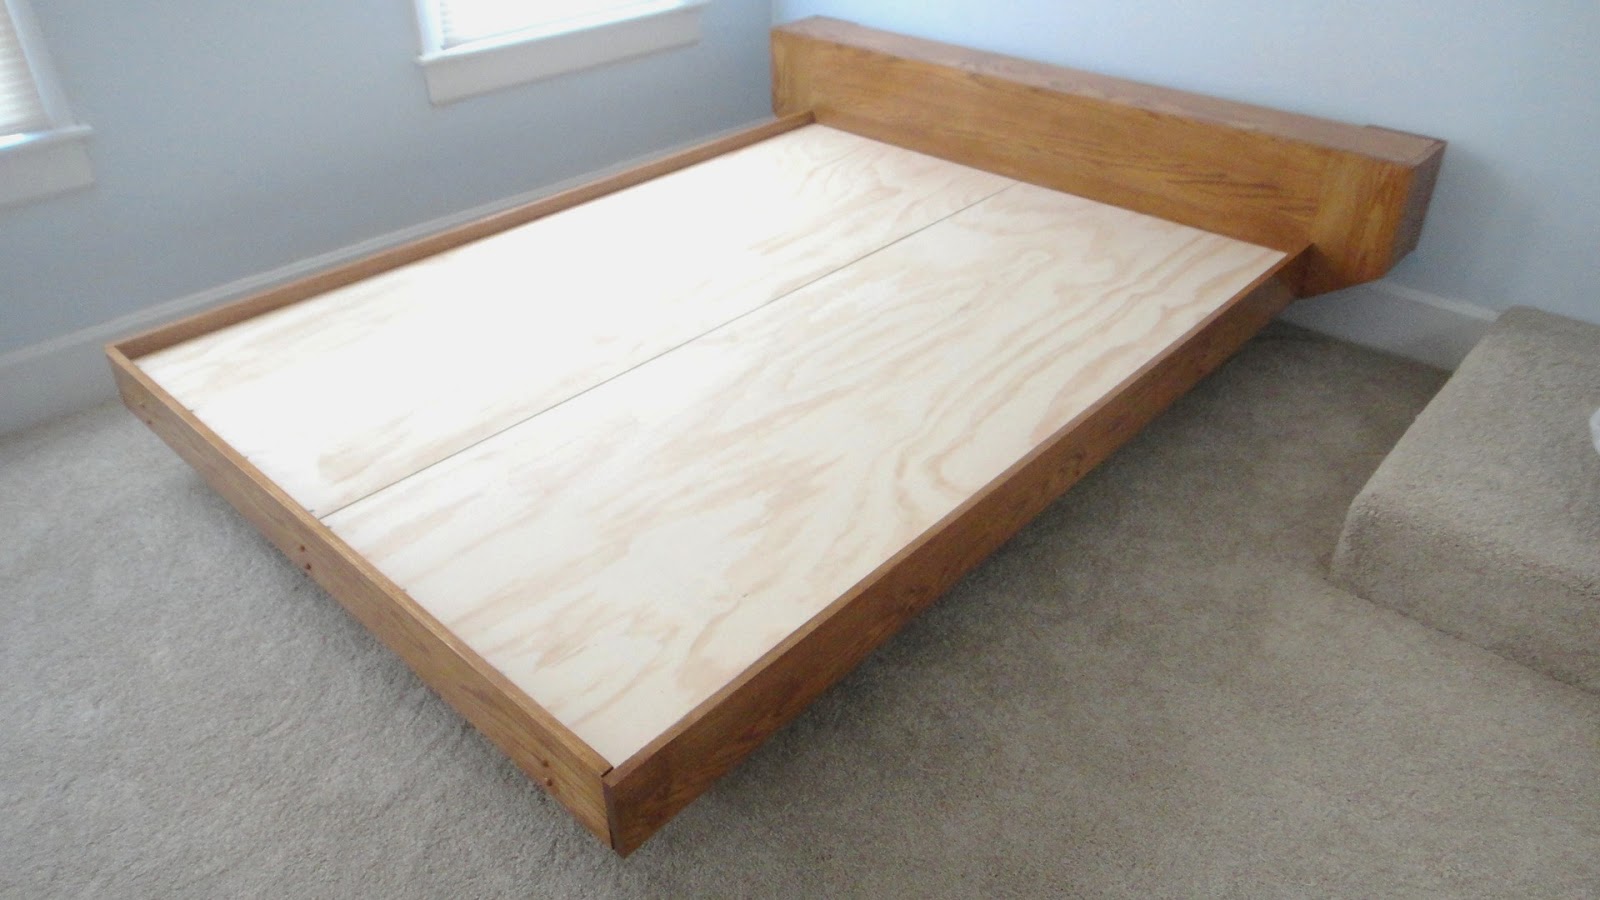 The Tinkers Workshop: The Platform Bed Project Is Completed!